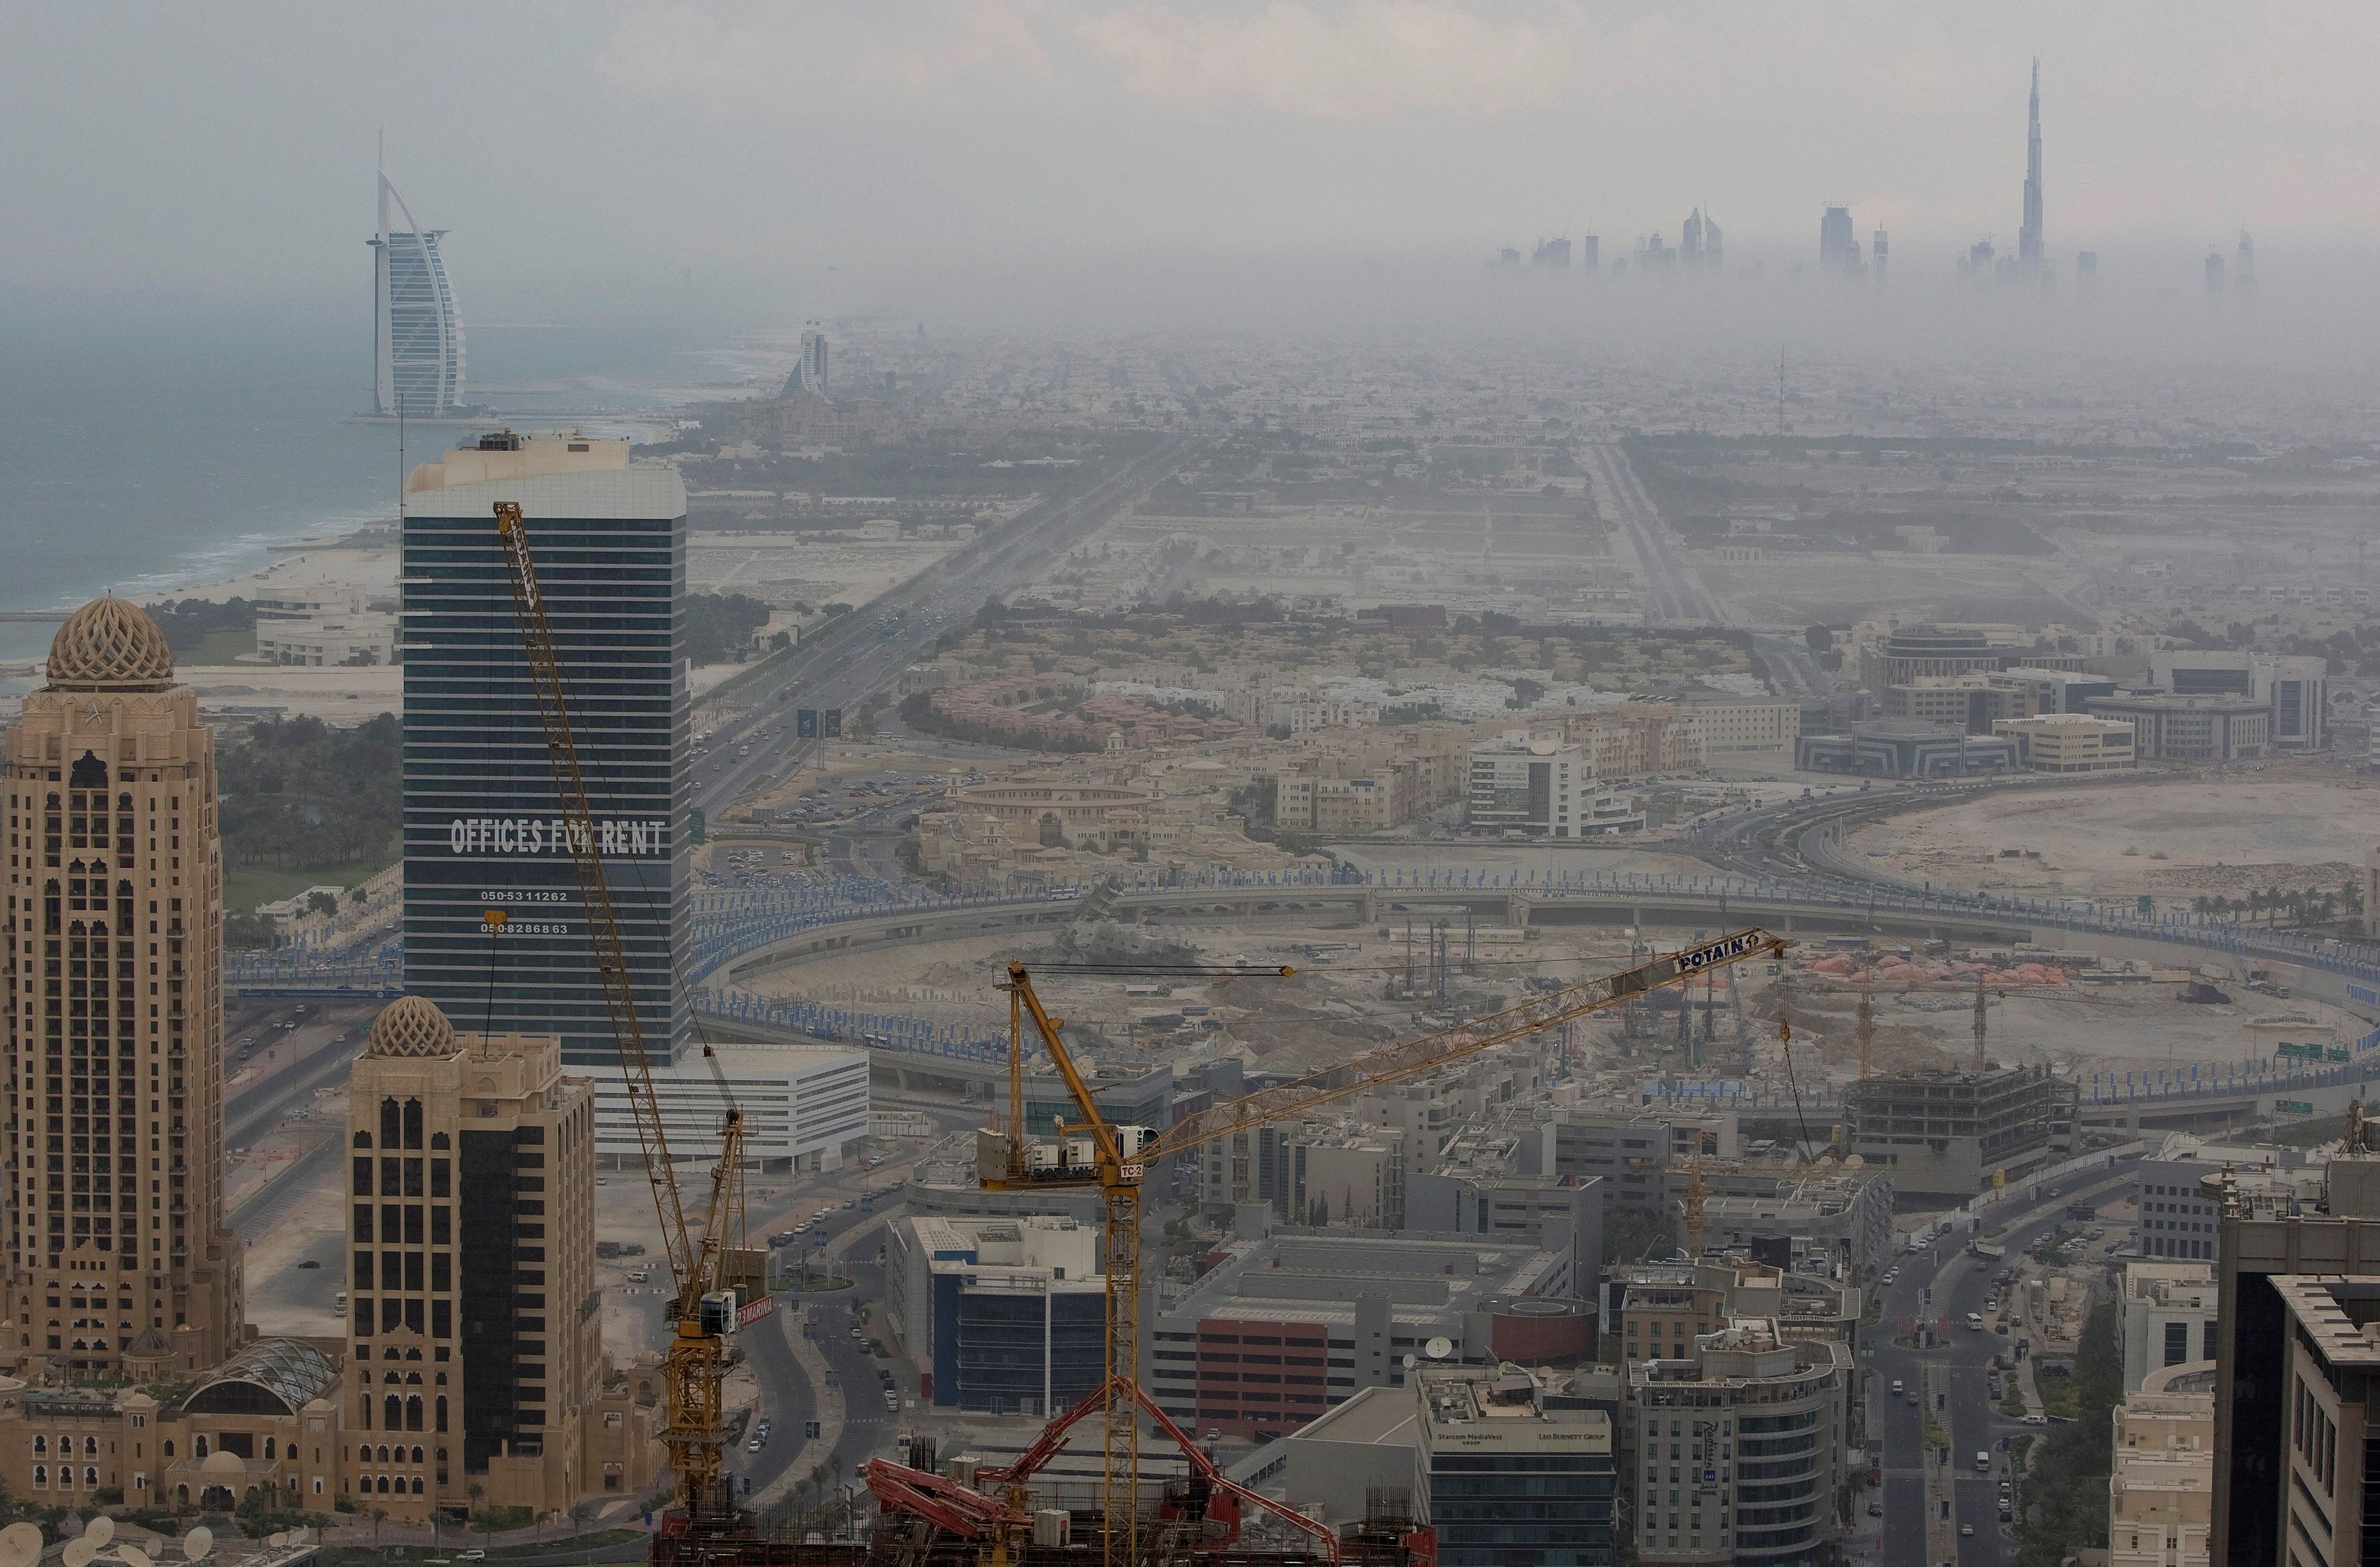 An early evening view of the Burj Dubai and Burj Al Arab with construction work in the foreground